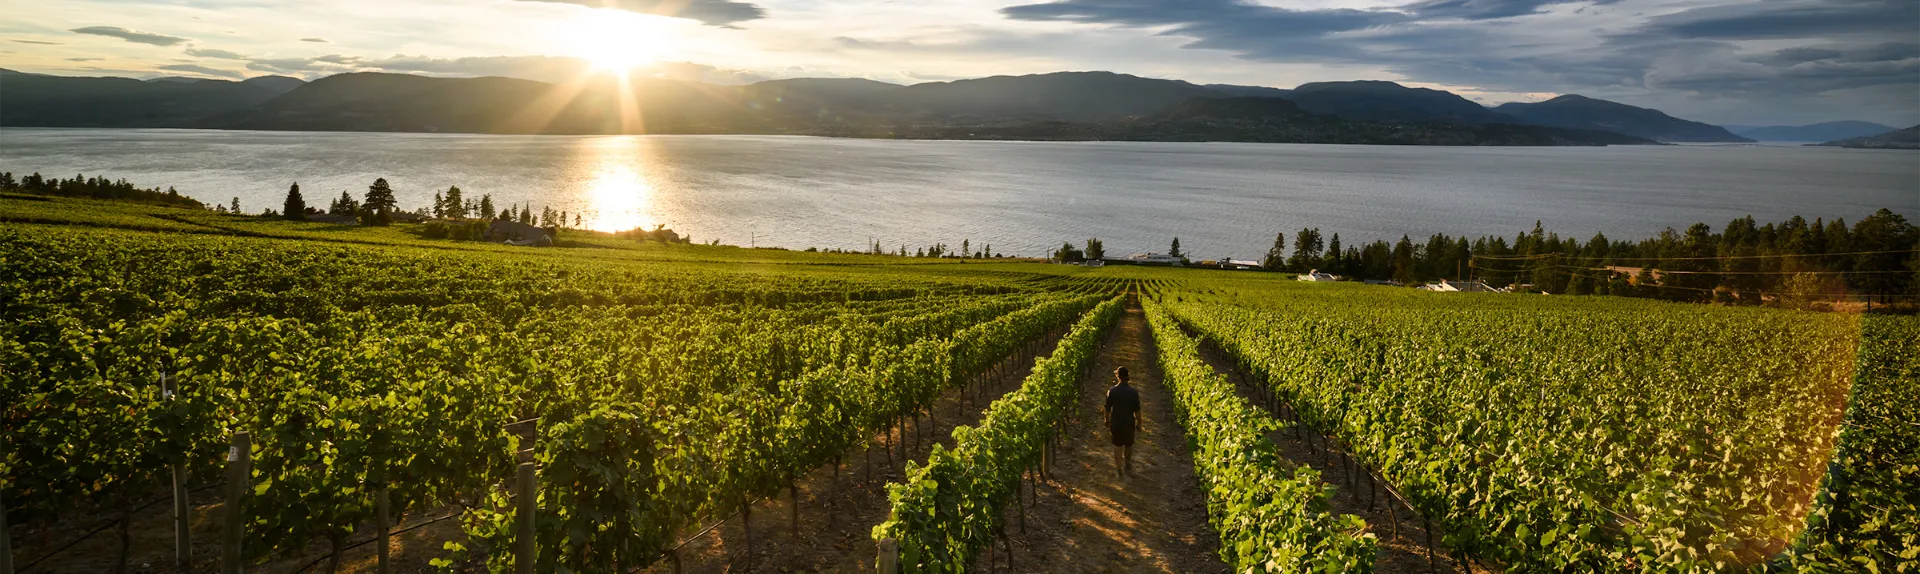 Vineyard in Okanagan during sunset. One of the stops on the 5-day Canadian Rockies bus tour.